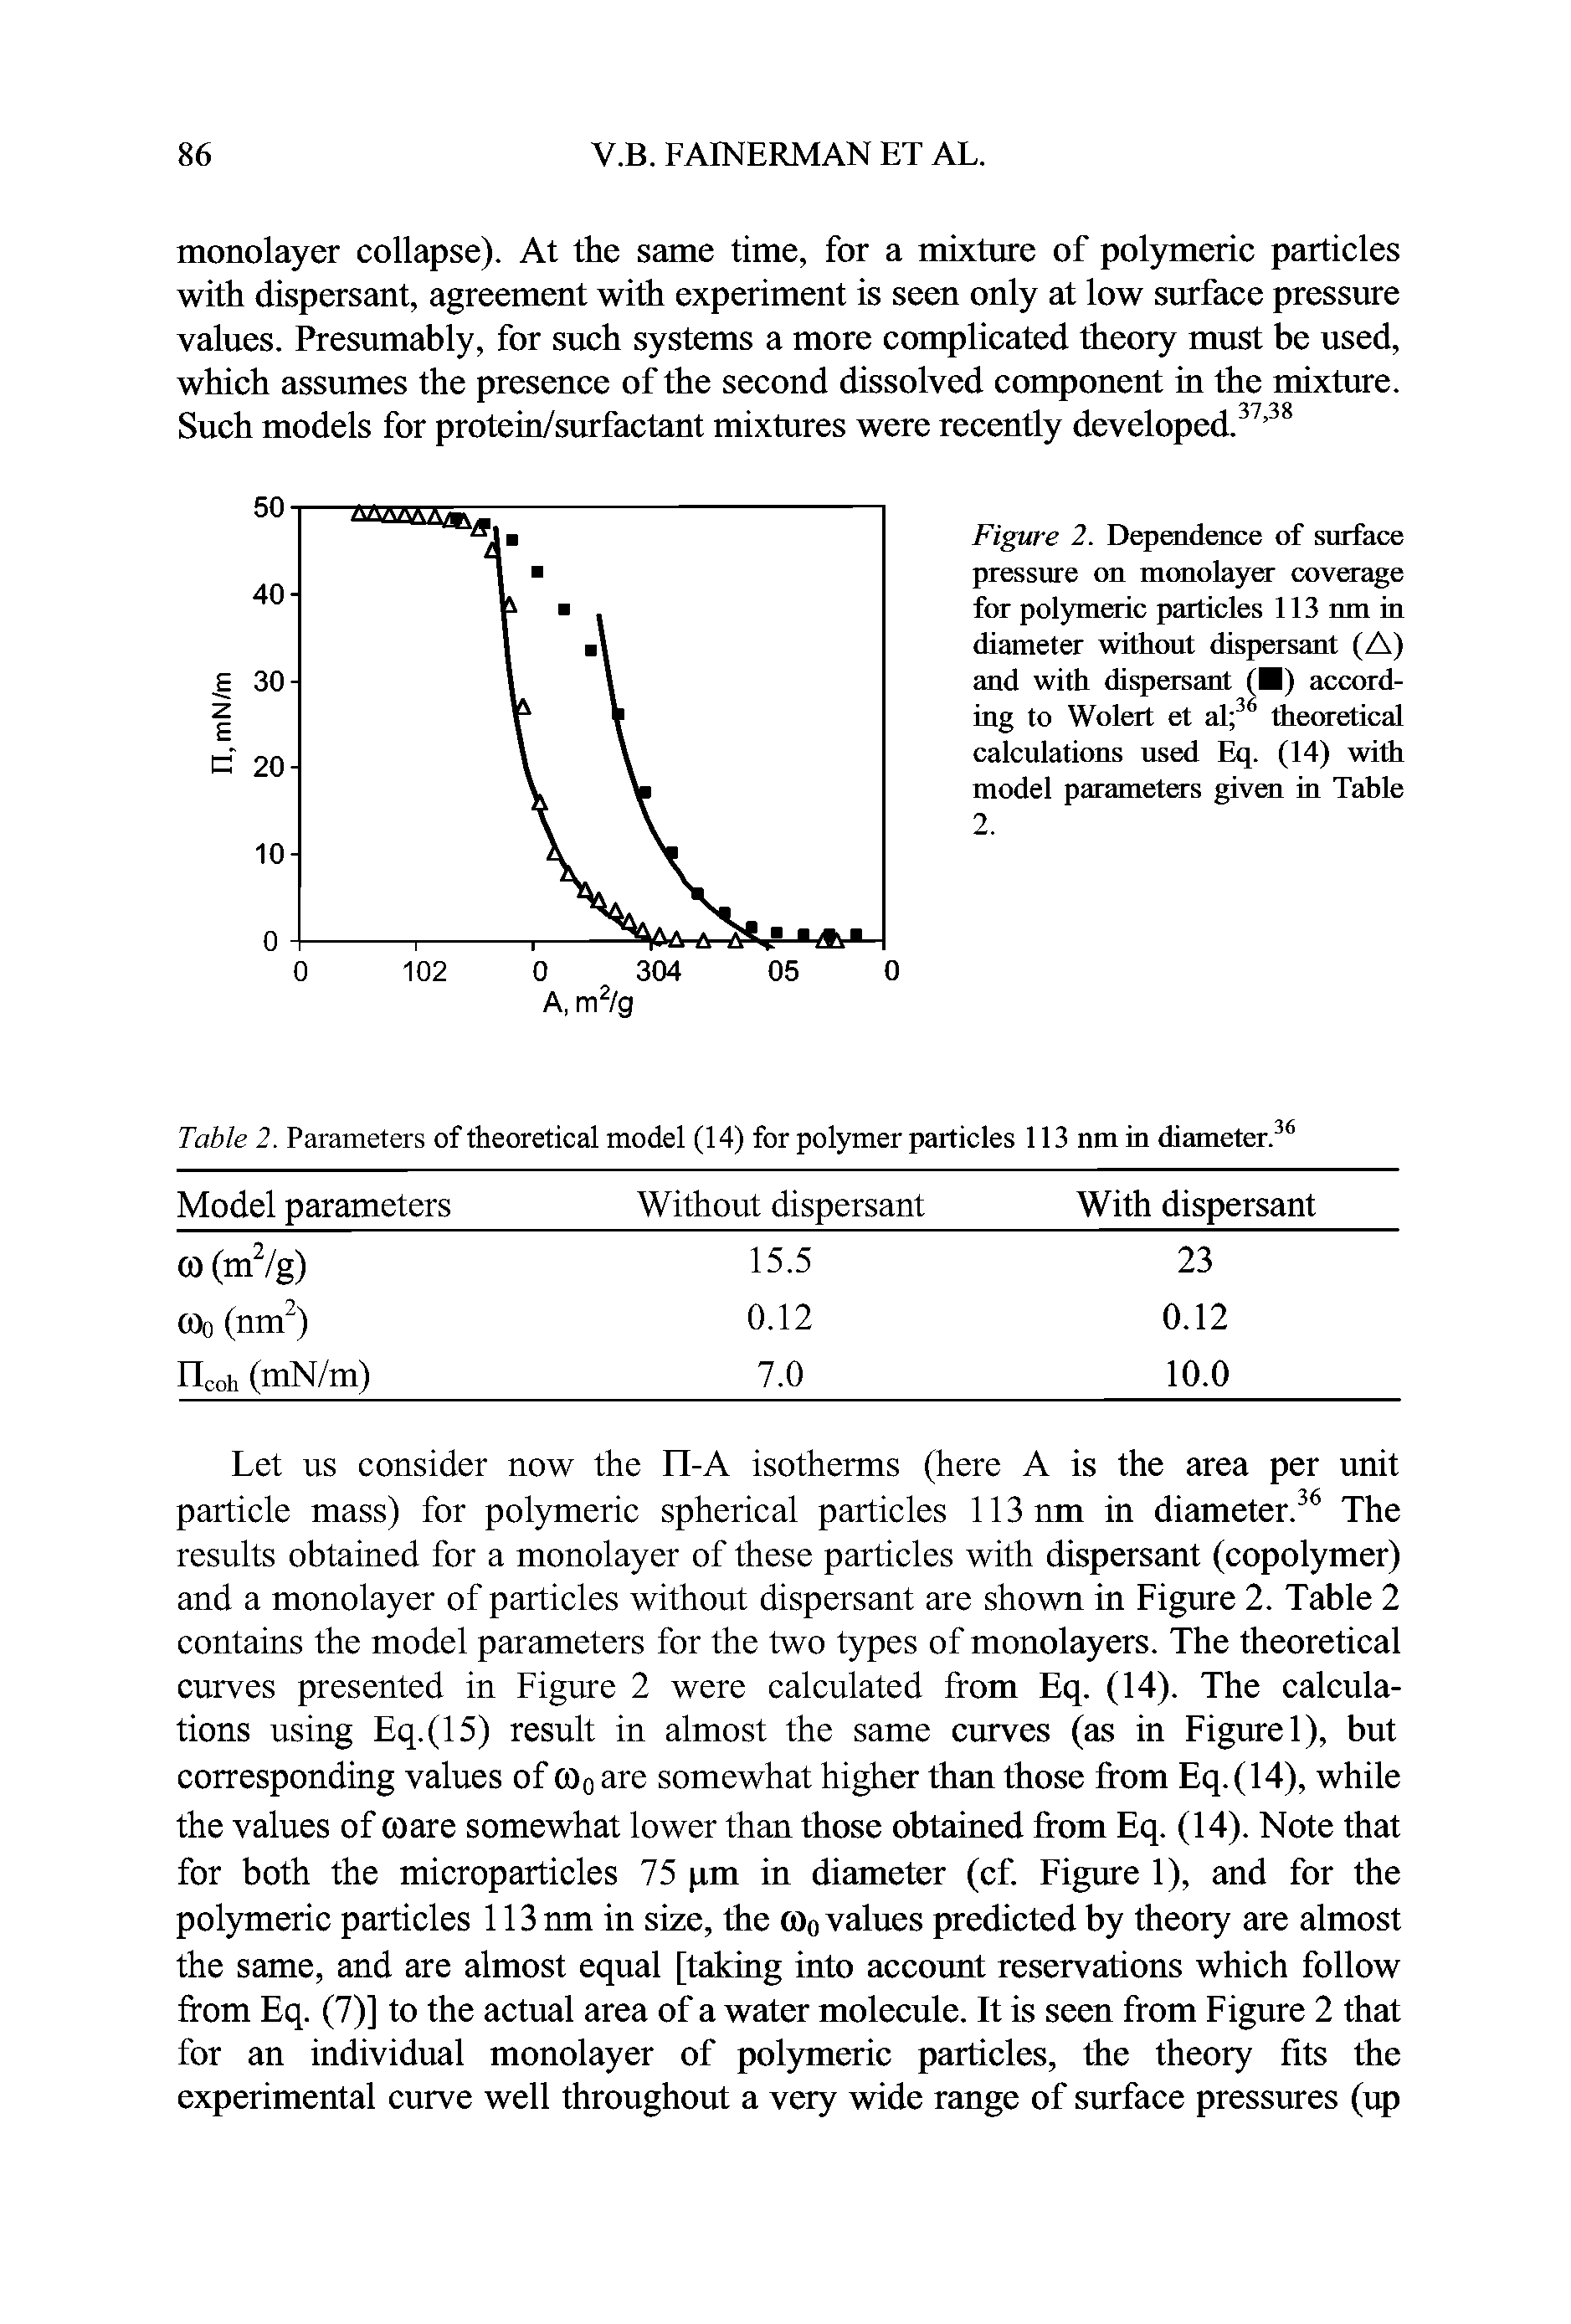 Figure 2. Dependence of surface pressure on monolayer coverage for polymeric particles 113 nm in diameter without dispersant (A) and with dispersant ( ) according to Wolert et al 36 theoretical calculations used Eq. (14) with model parameters given in Table 2.